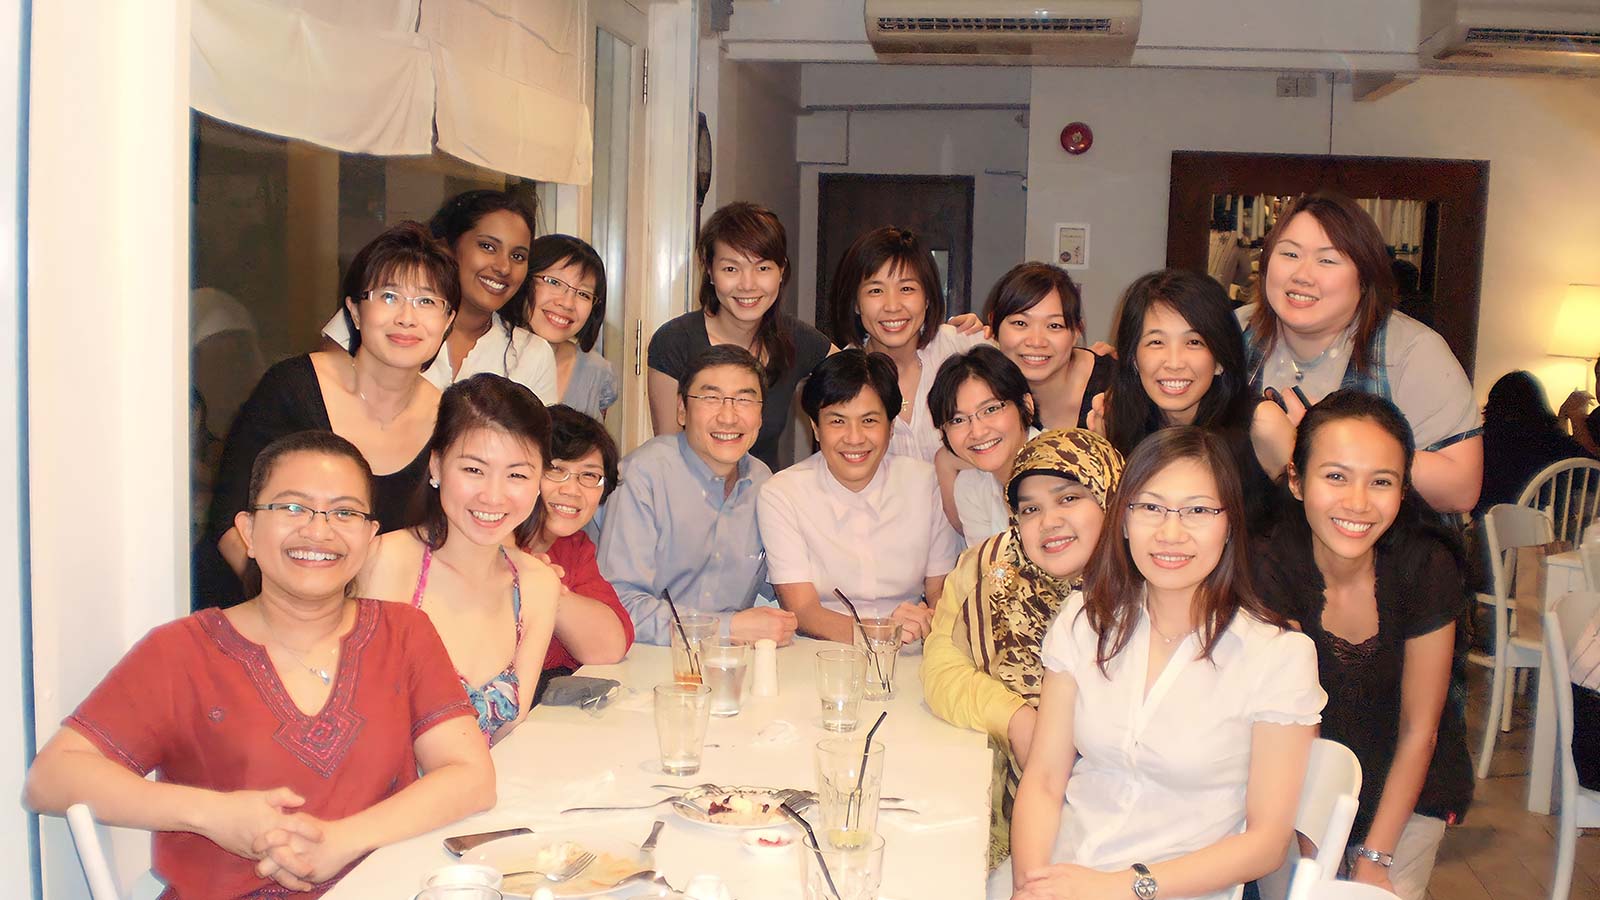 Prof Emily at an earlier gathering with NCIS nurses and Prof John Wong.